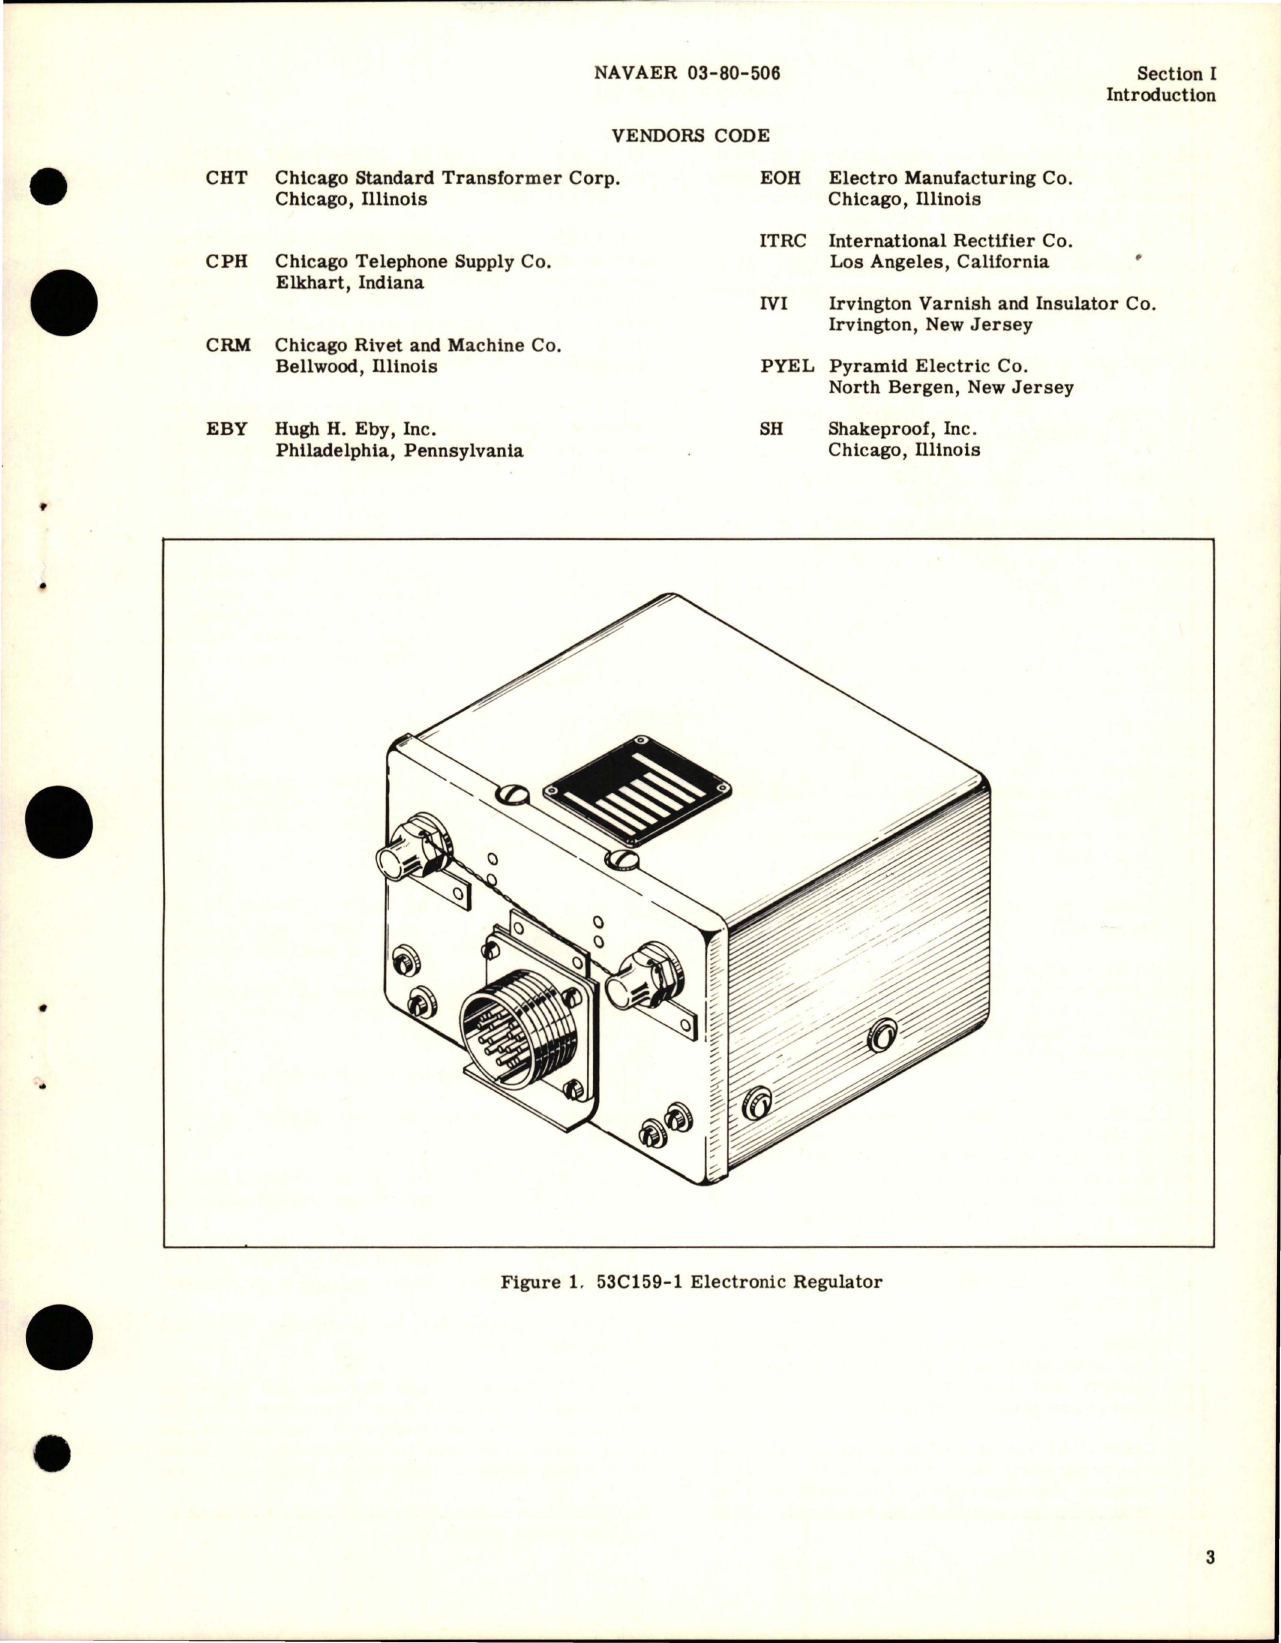 Sample page 5 from AirCorps Library document: Illustrated Parts Breakdown for Electronic Regulator - 53C159-1